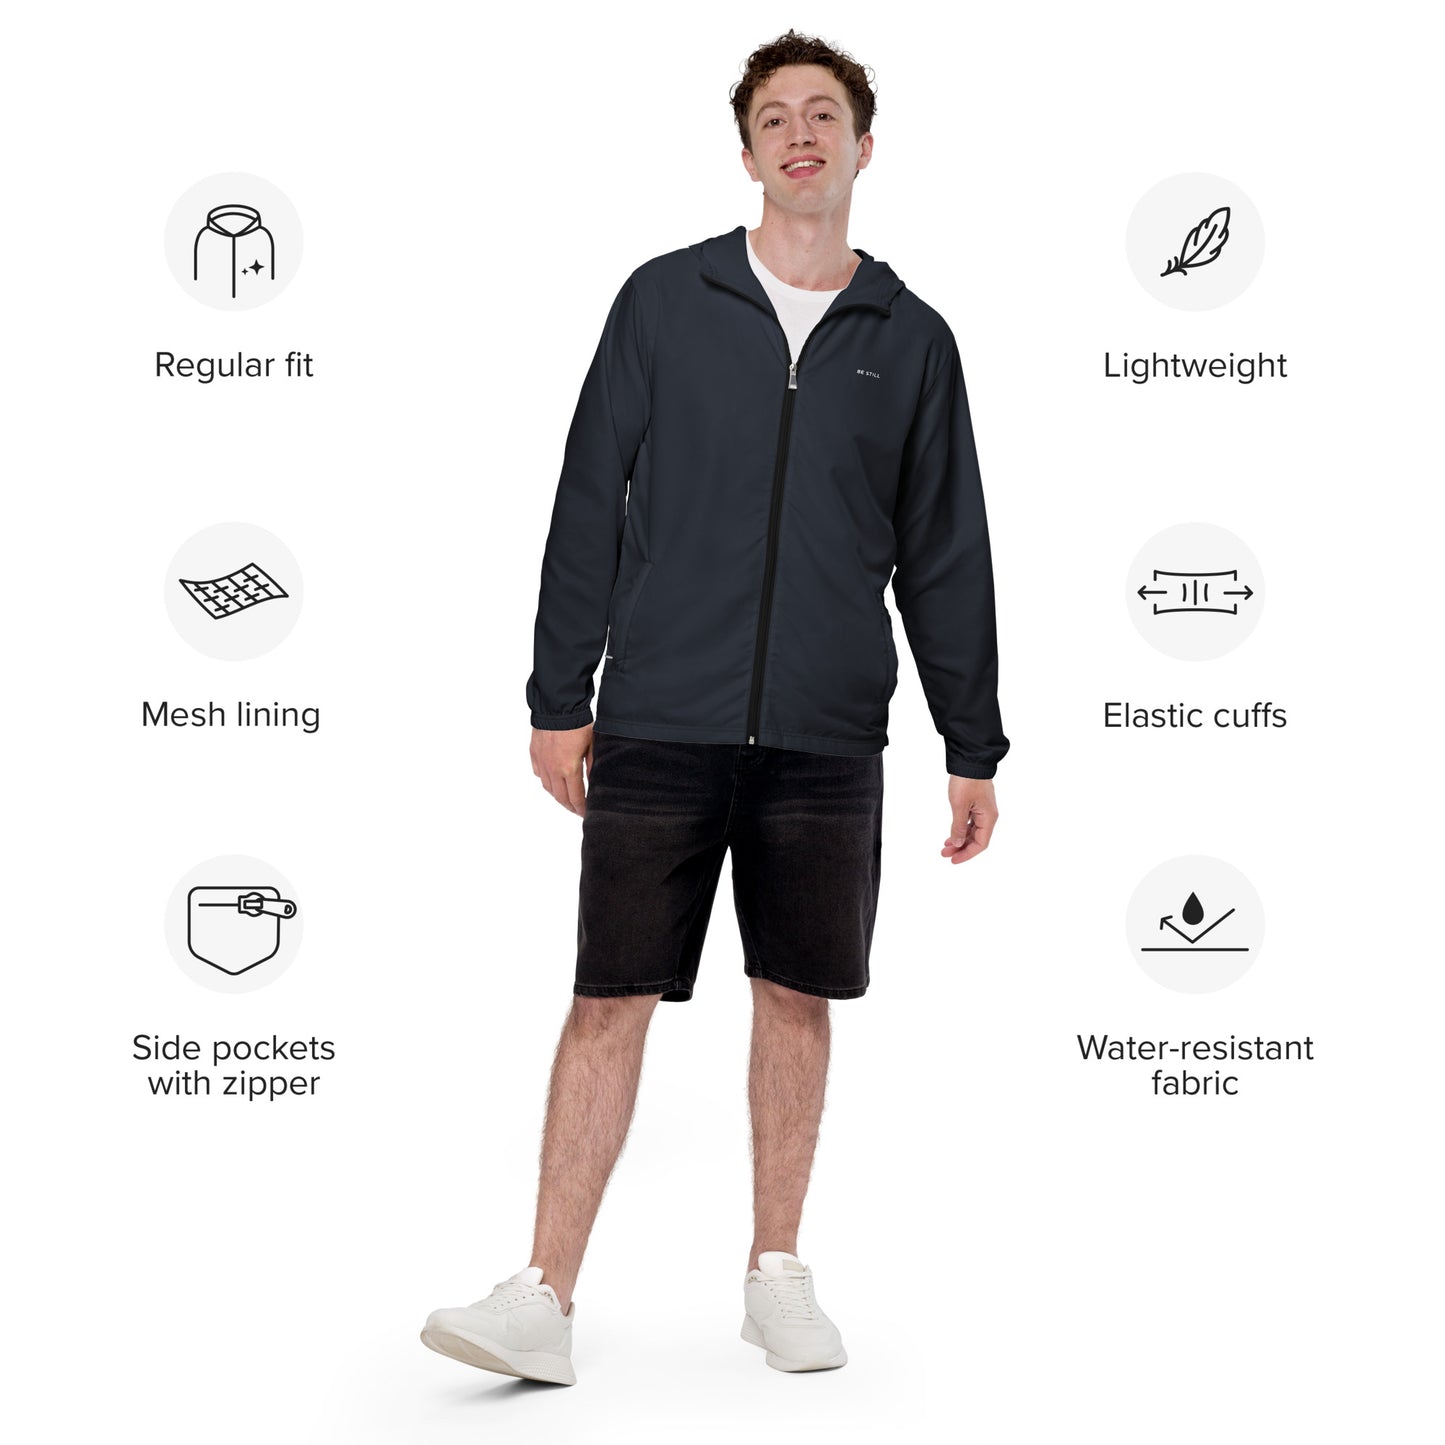 Features of the "Be Still" inspirational quote water-resistant windbreaker jacket: lightweight, side pockets with zipper, mesh lining